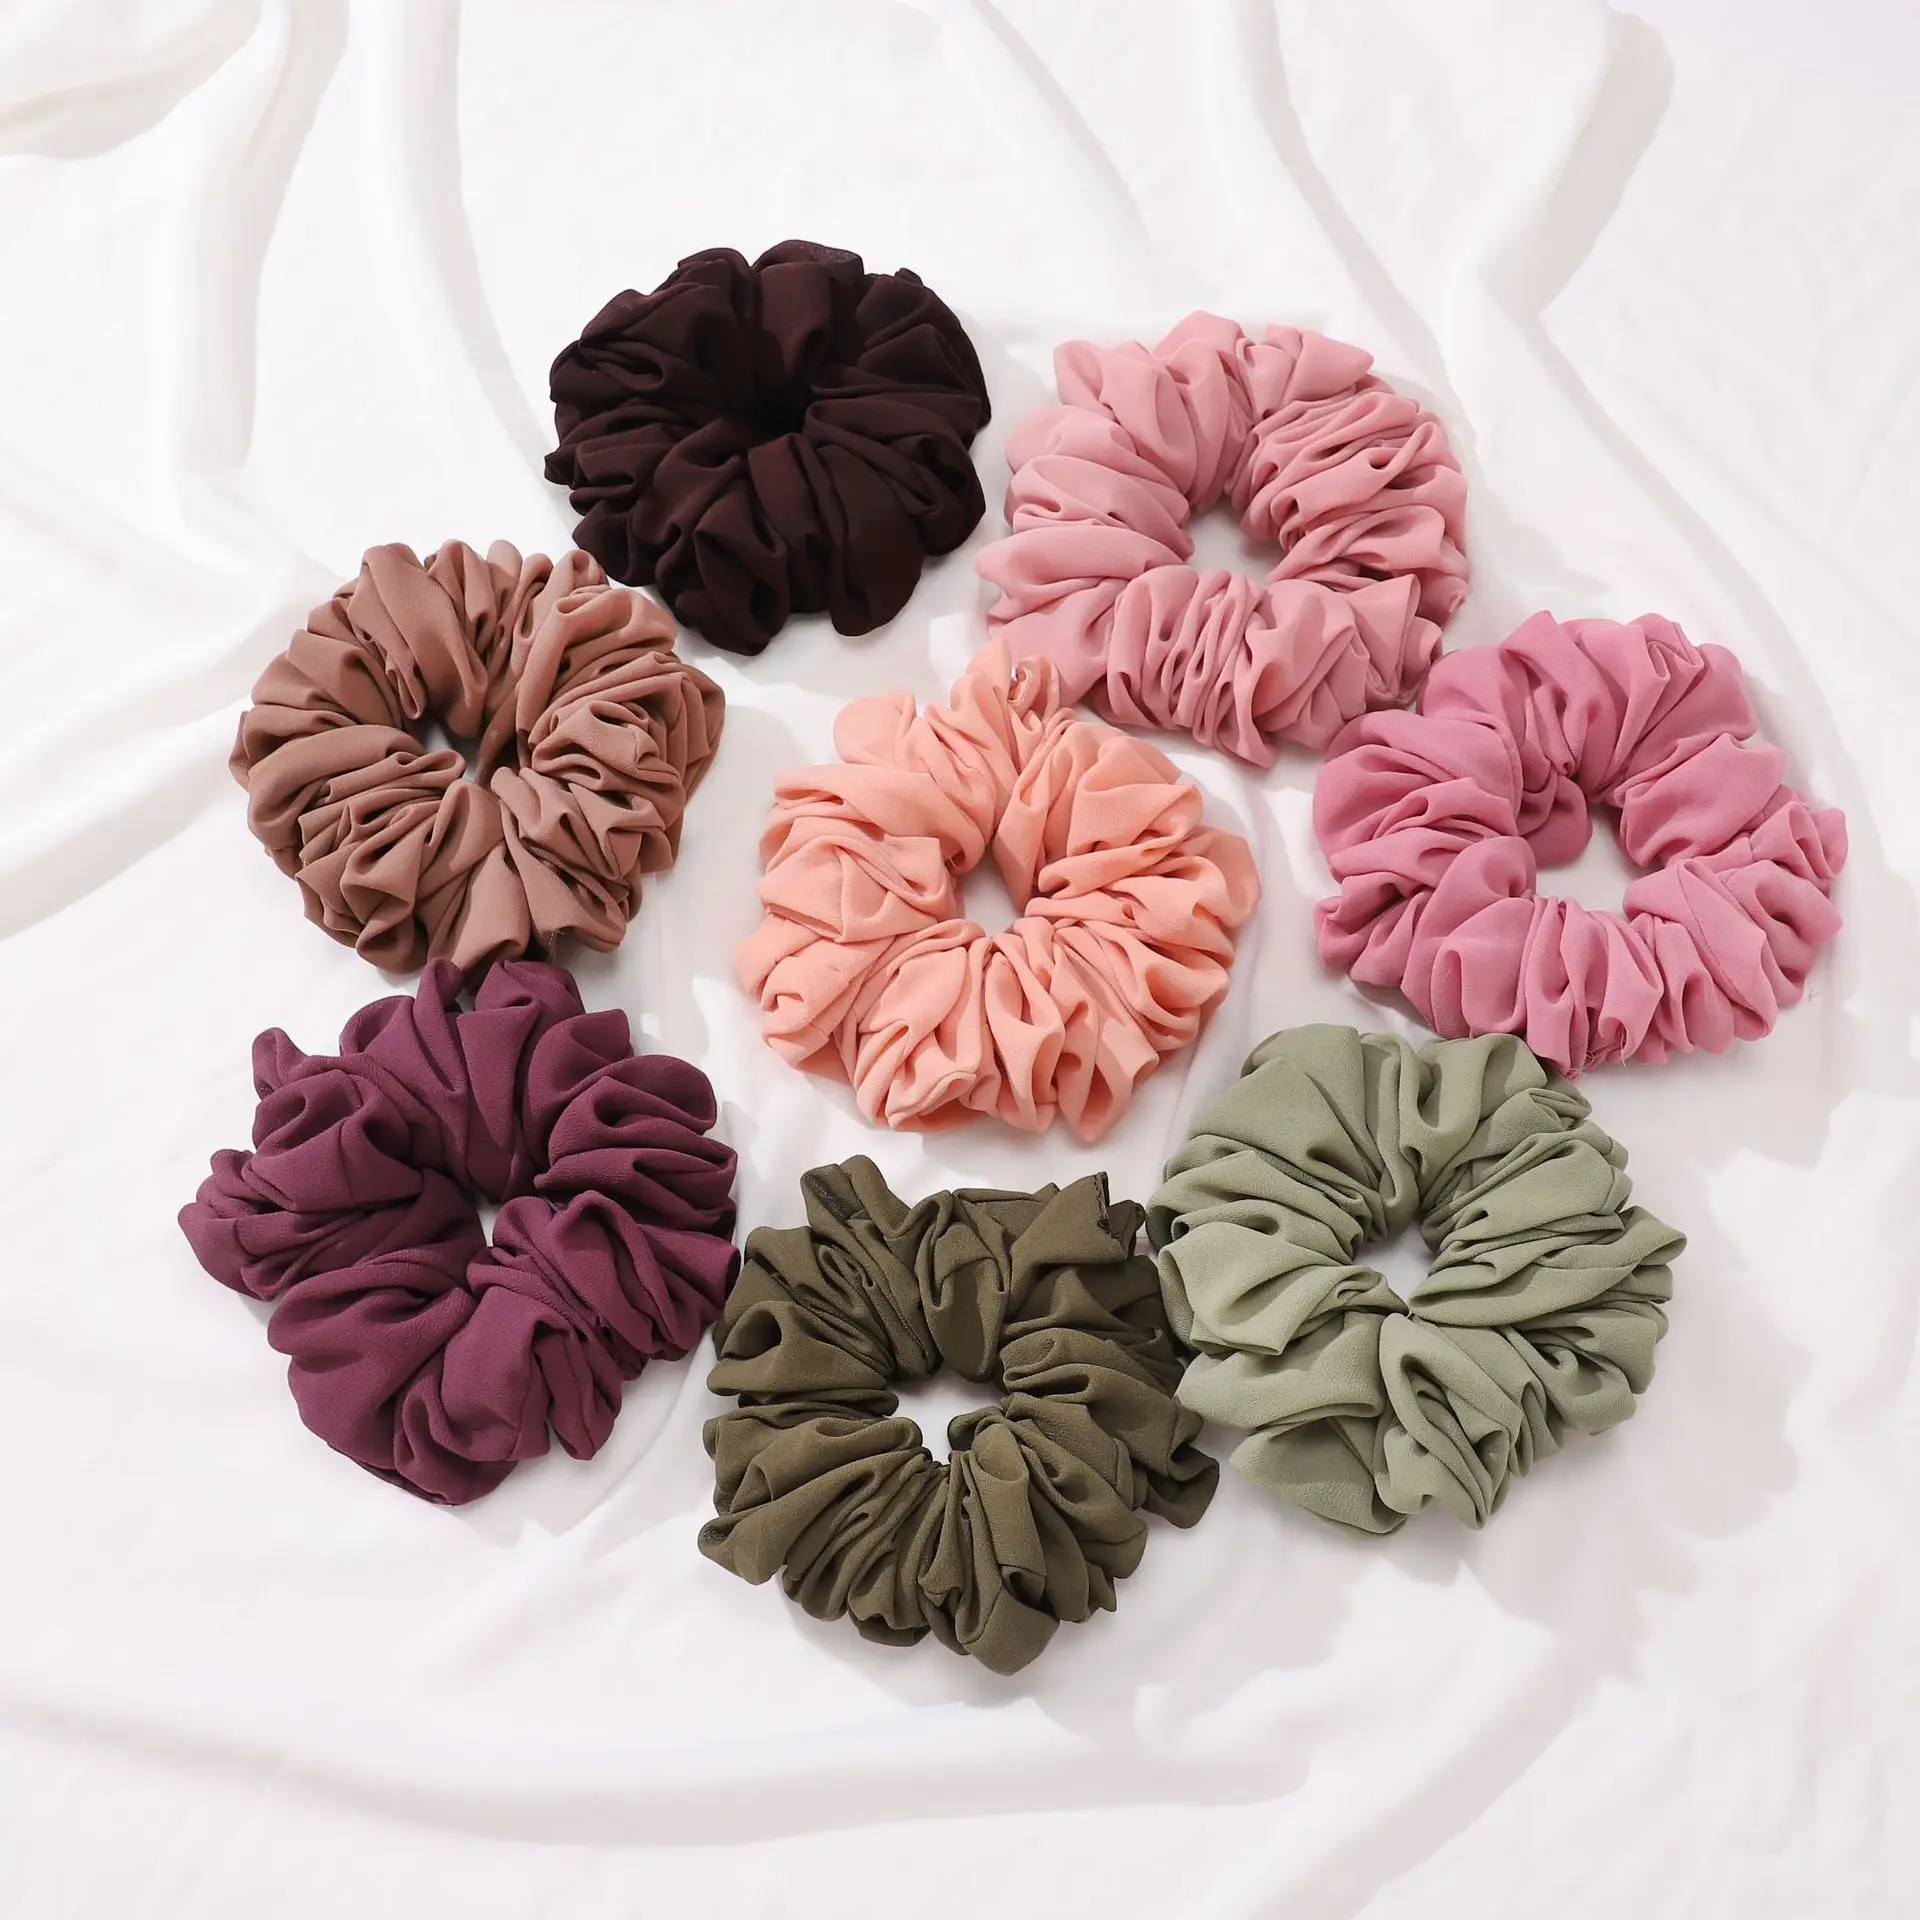 New Hair Scrunchies Giant Large Intestine Big Circle Oversized Scrunchies Elastic Hair Band Ponytail Holder Hair Tie Accessories